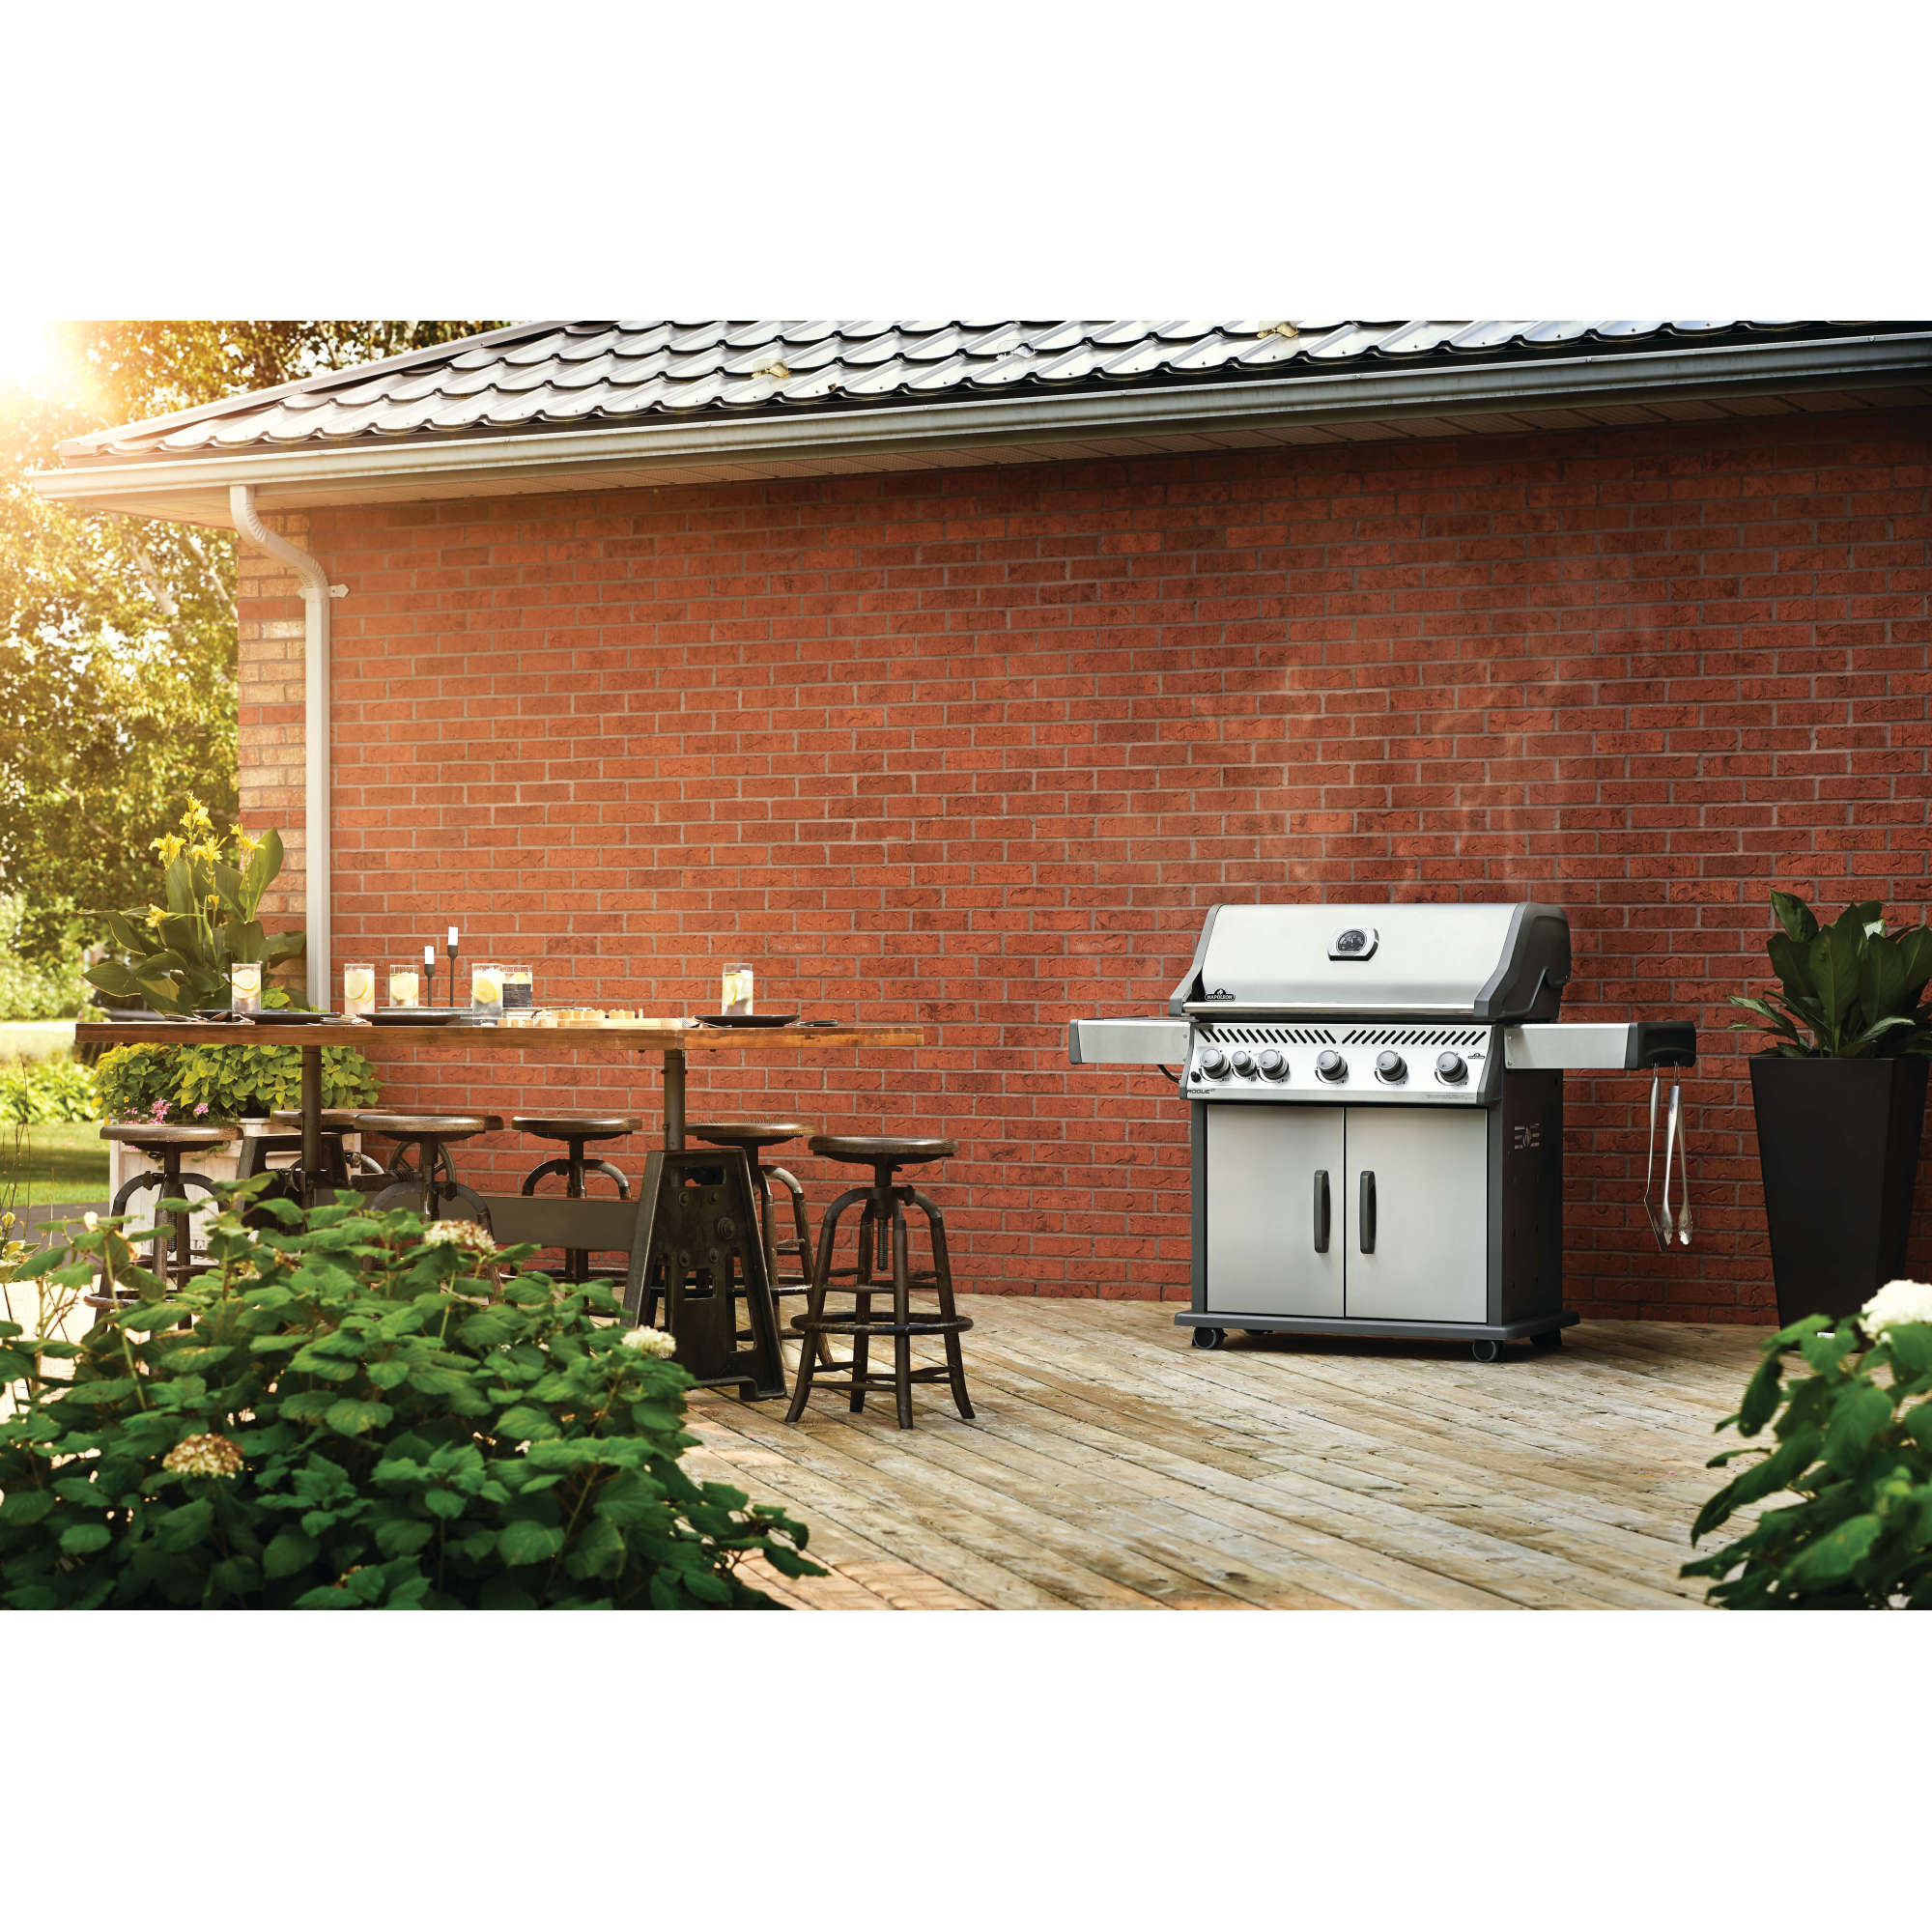  MASTER COOK 3 Burner BBQ Propane Gas Grill, Stainless Steel  30,000 BTU Patio Garden Barbecue Grill with Two Foldable Shelves : Patio,  Lawn & Garden